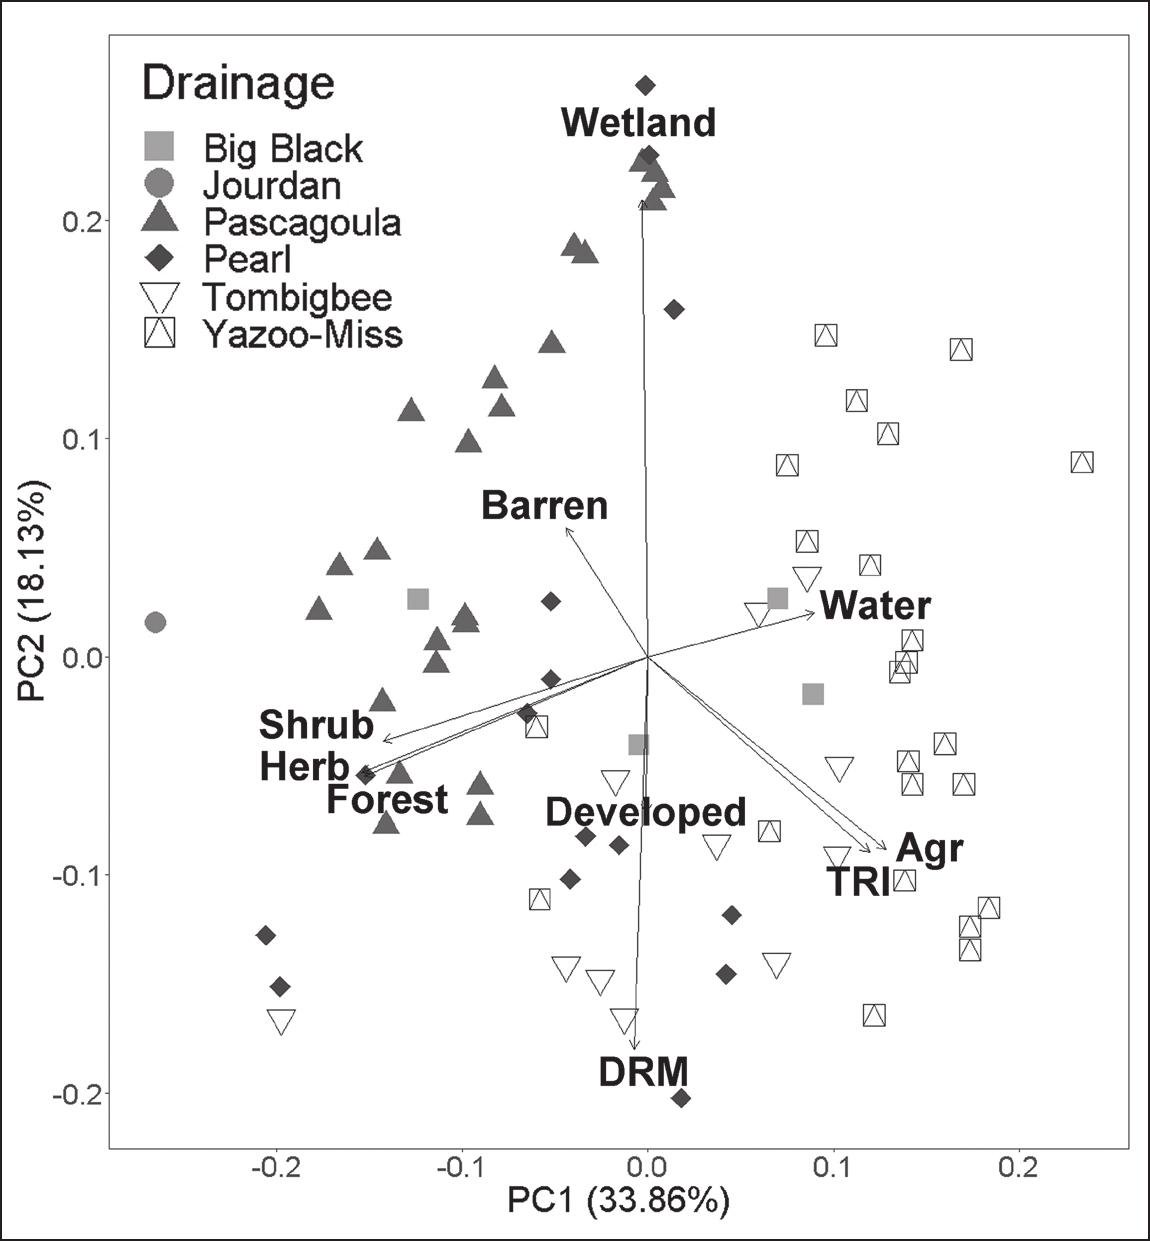 MDWFP - Using Science to Identify the Best Traps for Animal Welfare